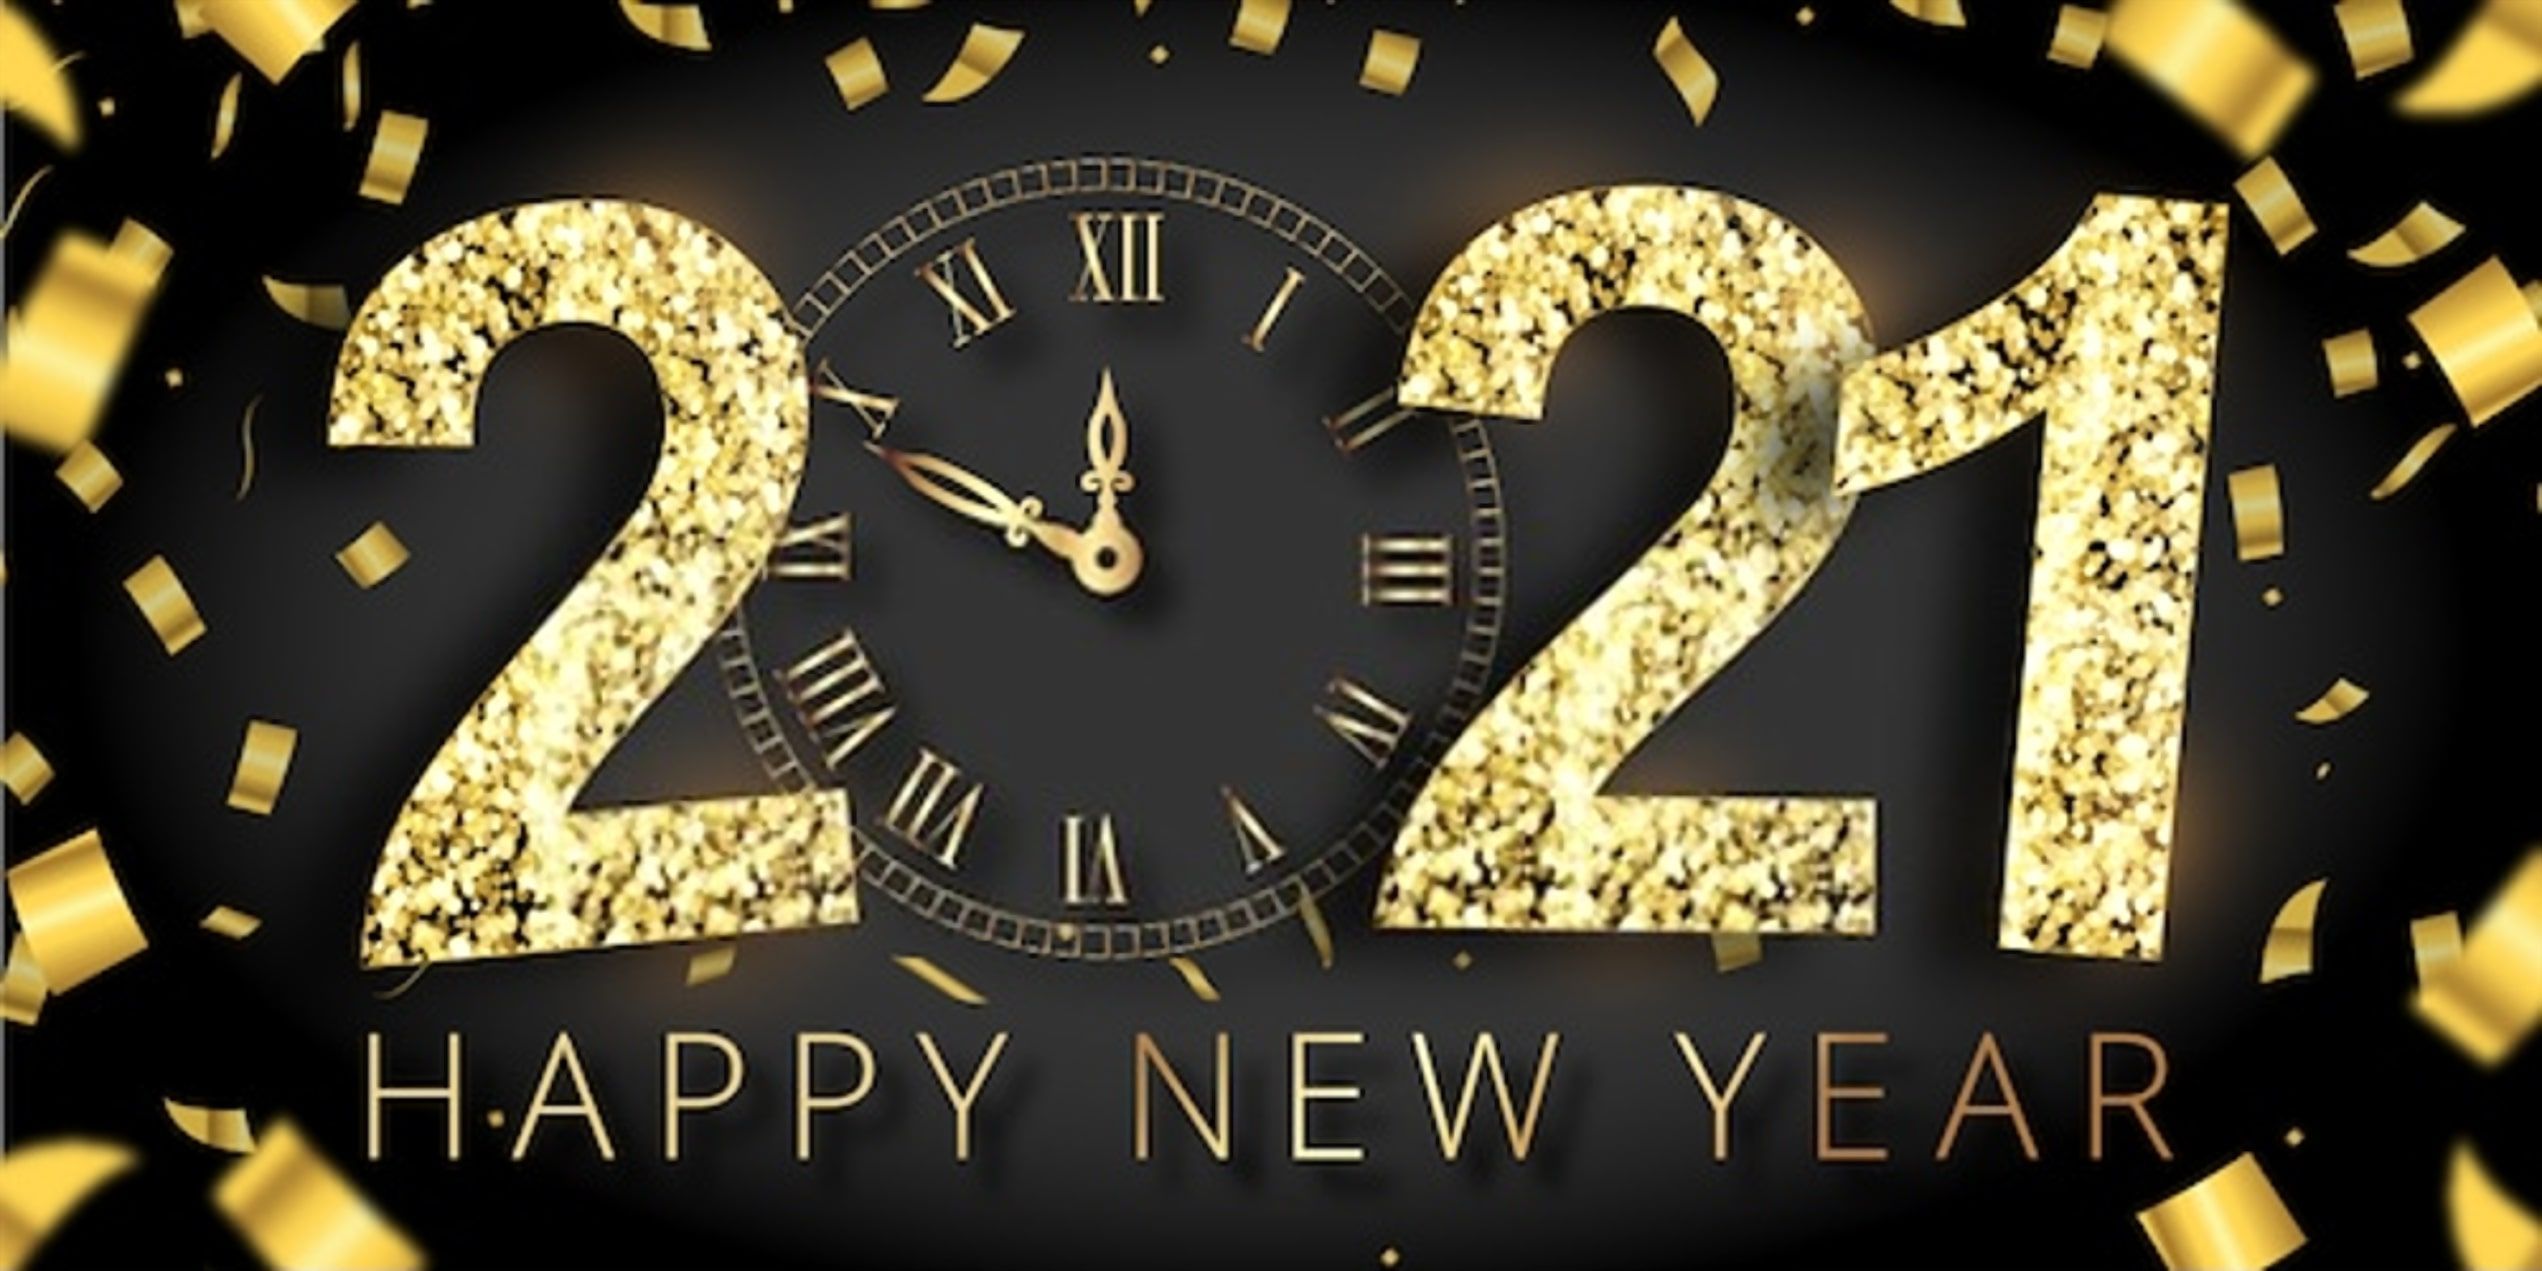 2542x1271 Eye Catching Happy New Year 2022 Image In 2022 Happy New Year Banner Happy New Year Image Happy New Year Wishes